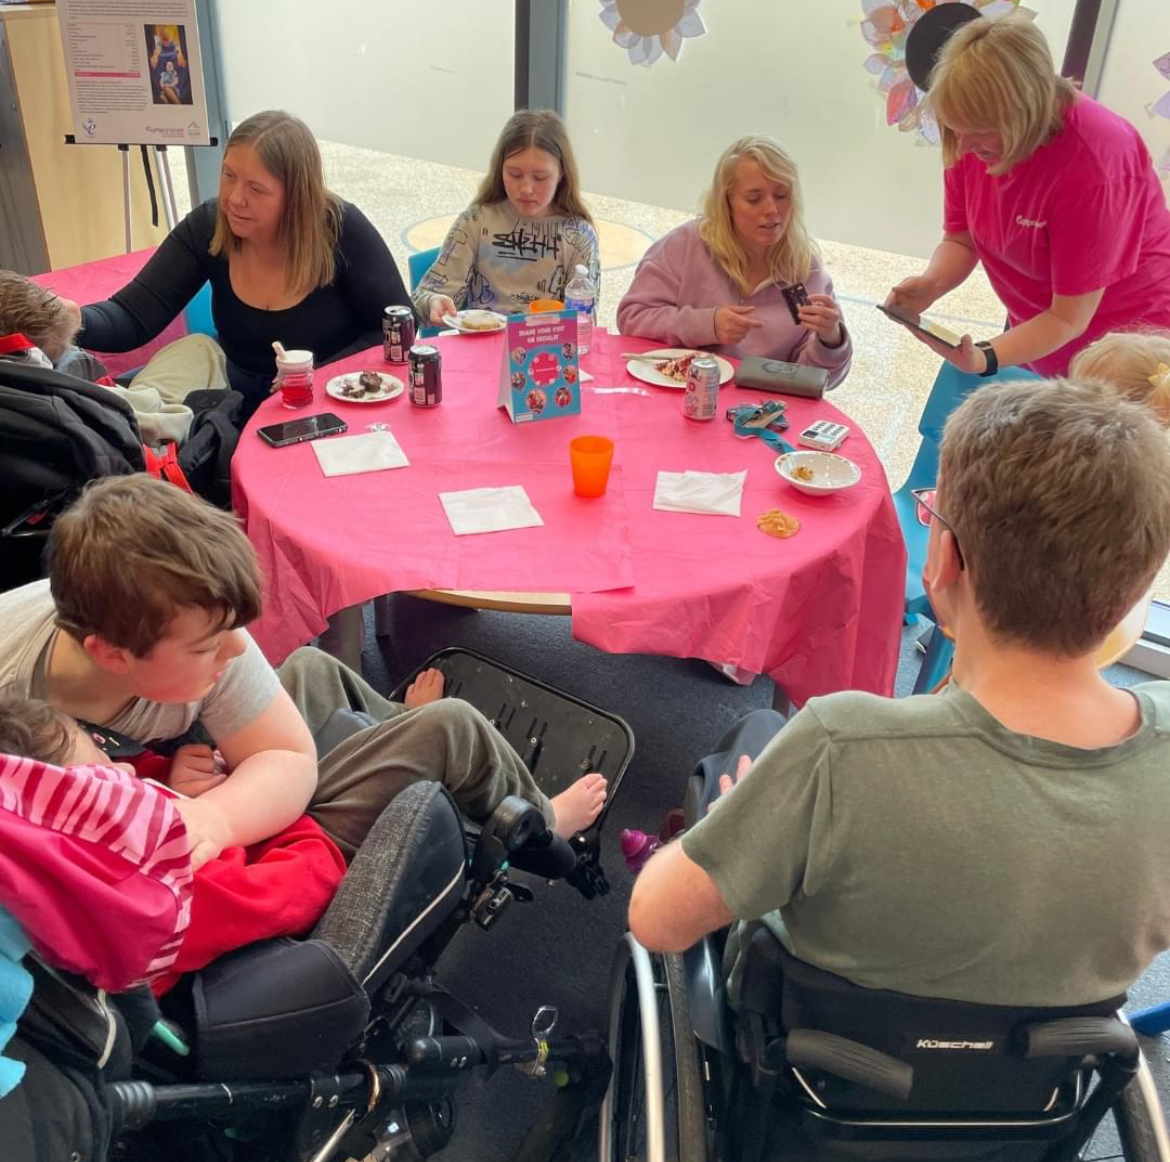 HUGE thanks to ALL our volunteers from Motability, PFK-Francis Clark, Shakespeare Martineau, Ascot Group, NatWest, Container Team, Oaklands, Irwin Mitchell, Christie Finance, & SR2 for the Pop Up support this Easter! 🙌 Volunteer this Summer? jenny@gympanzees.org #Volunteer